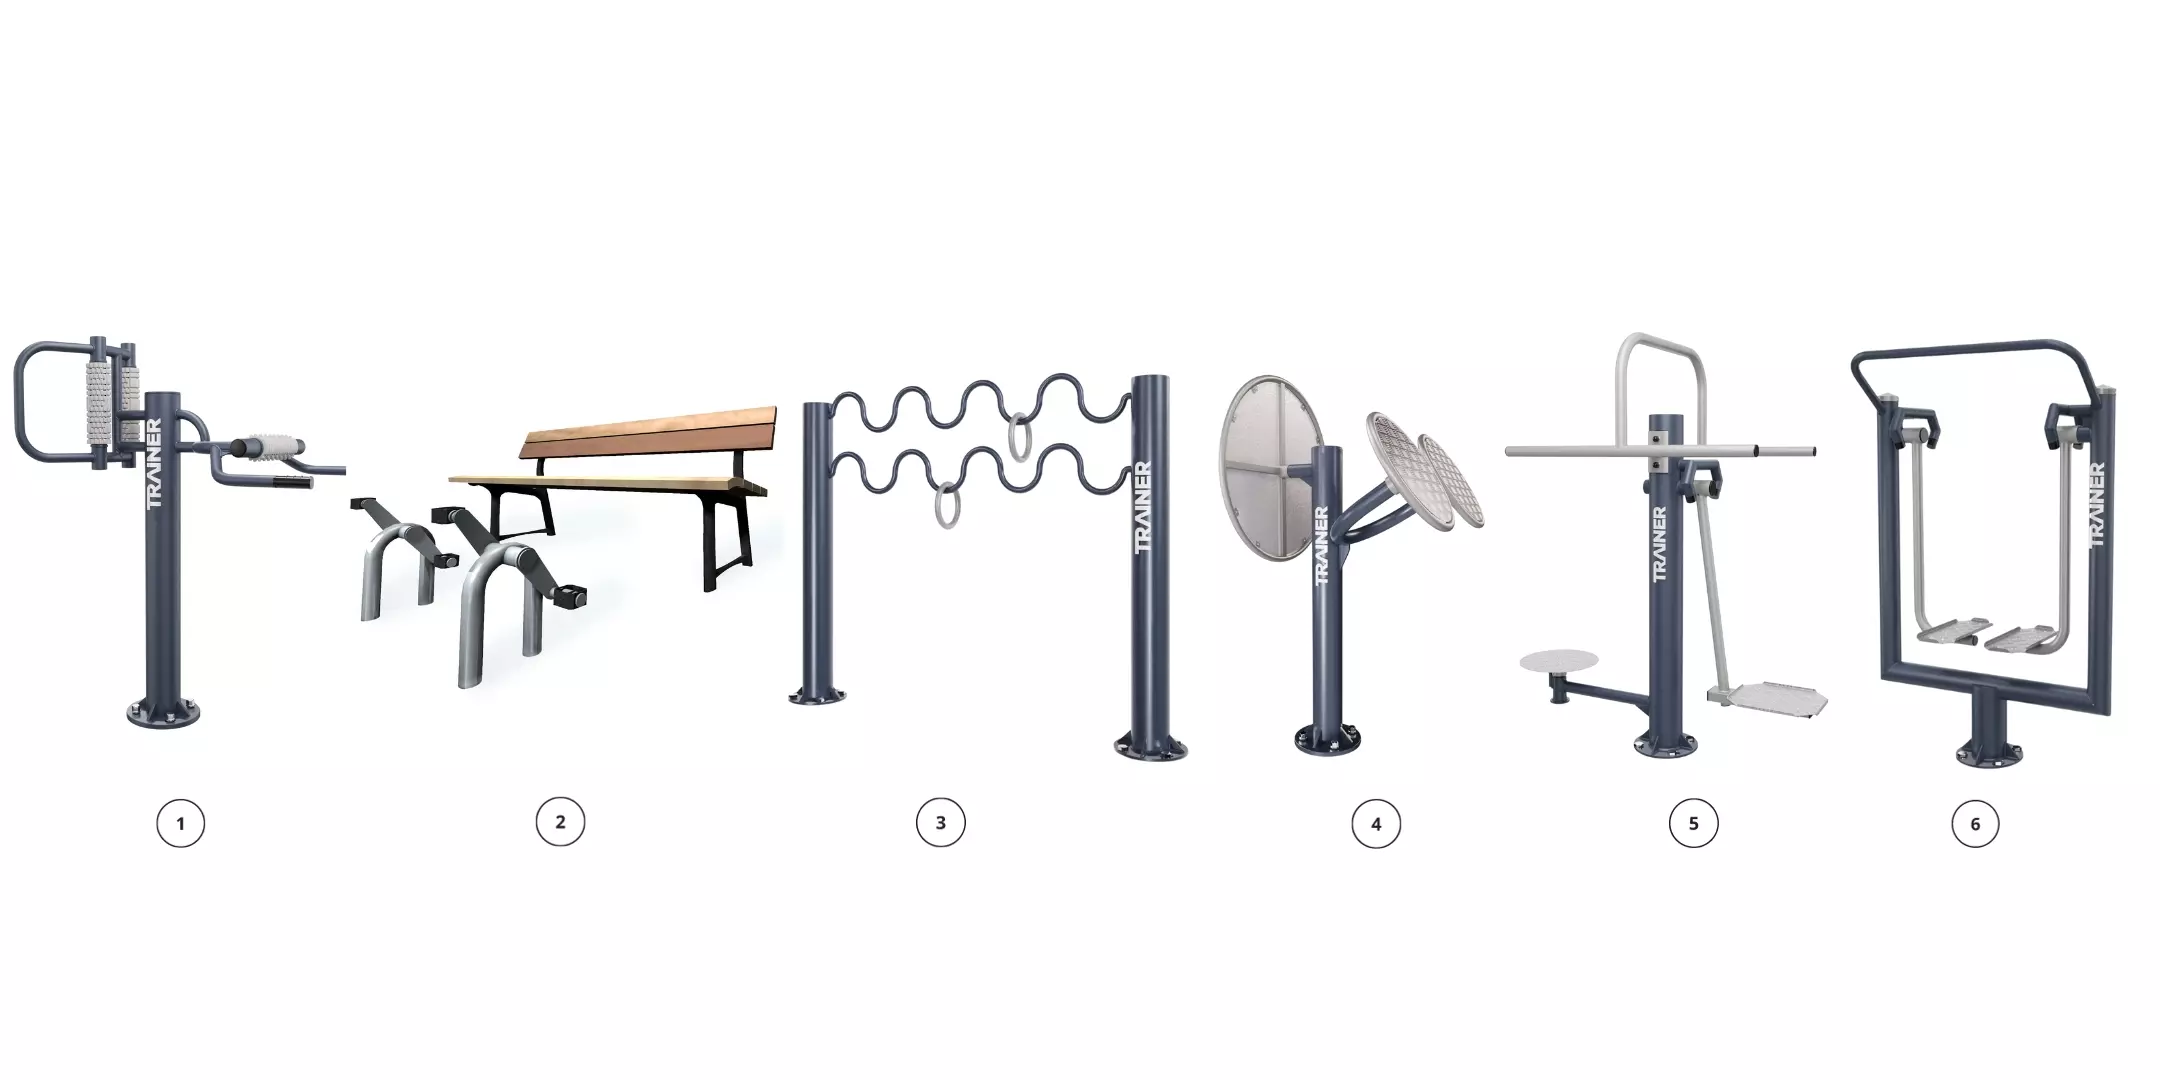 Outdoor fitness equipment sets for older people